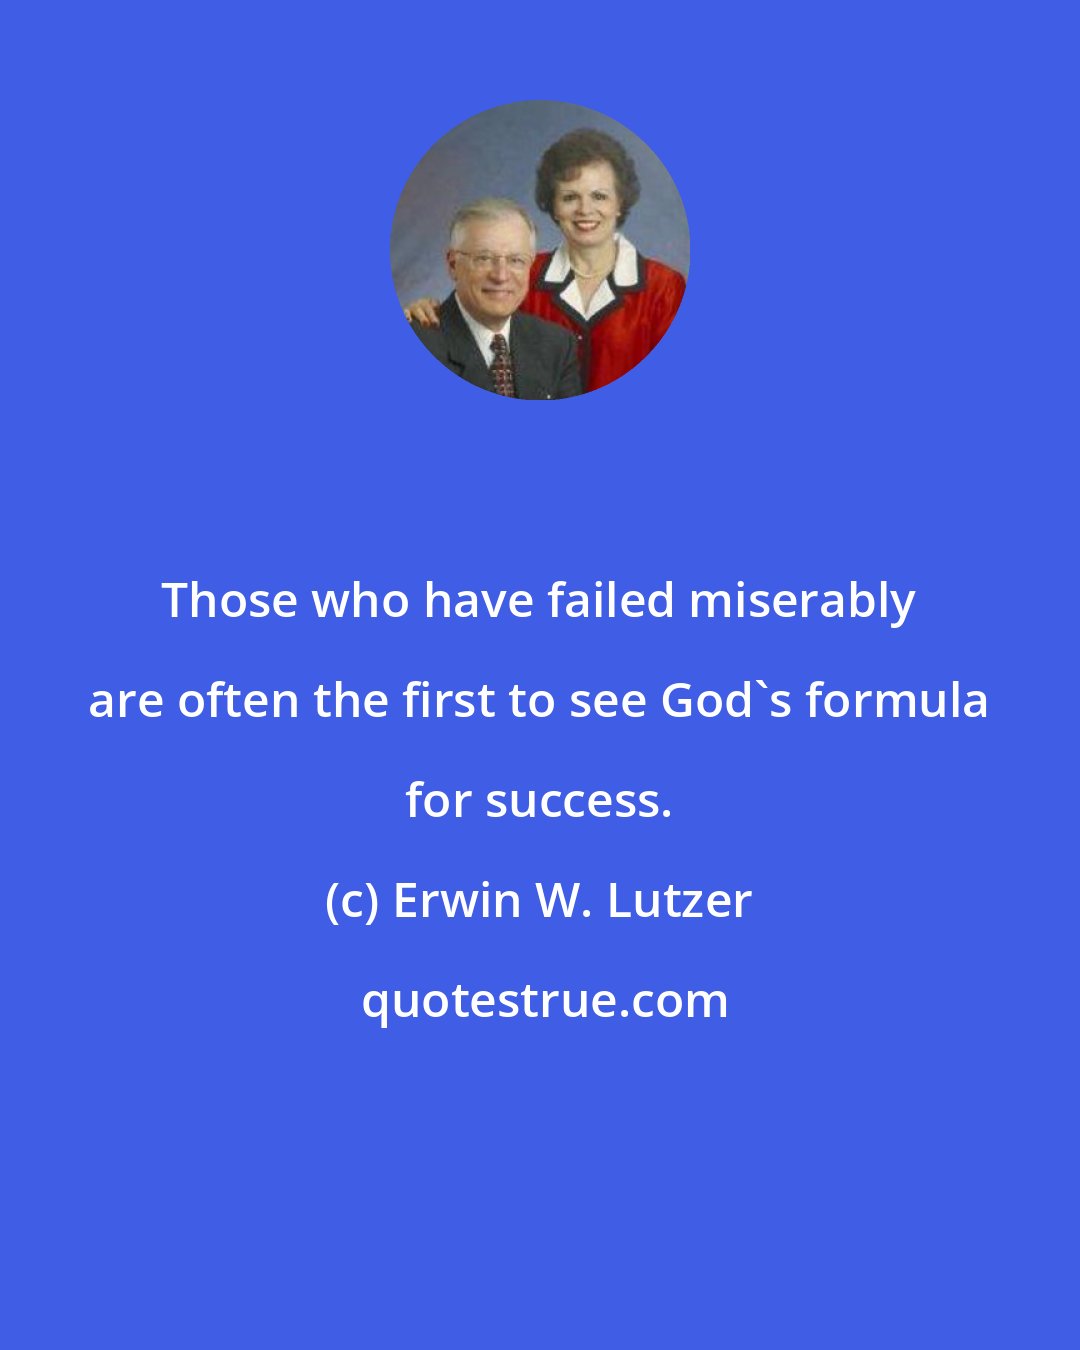 Erwin W. Lutzer: Those who have failed miserably are often the first to see God's formula for success.